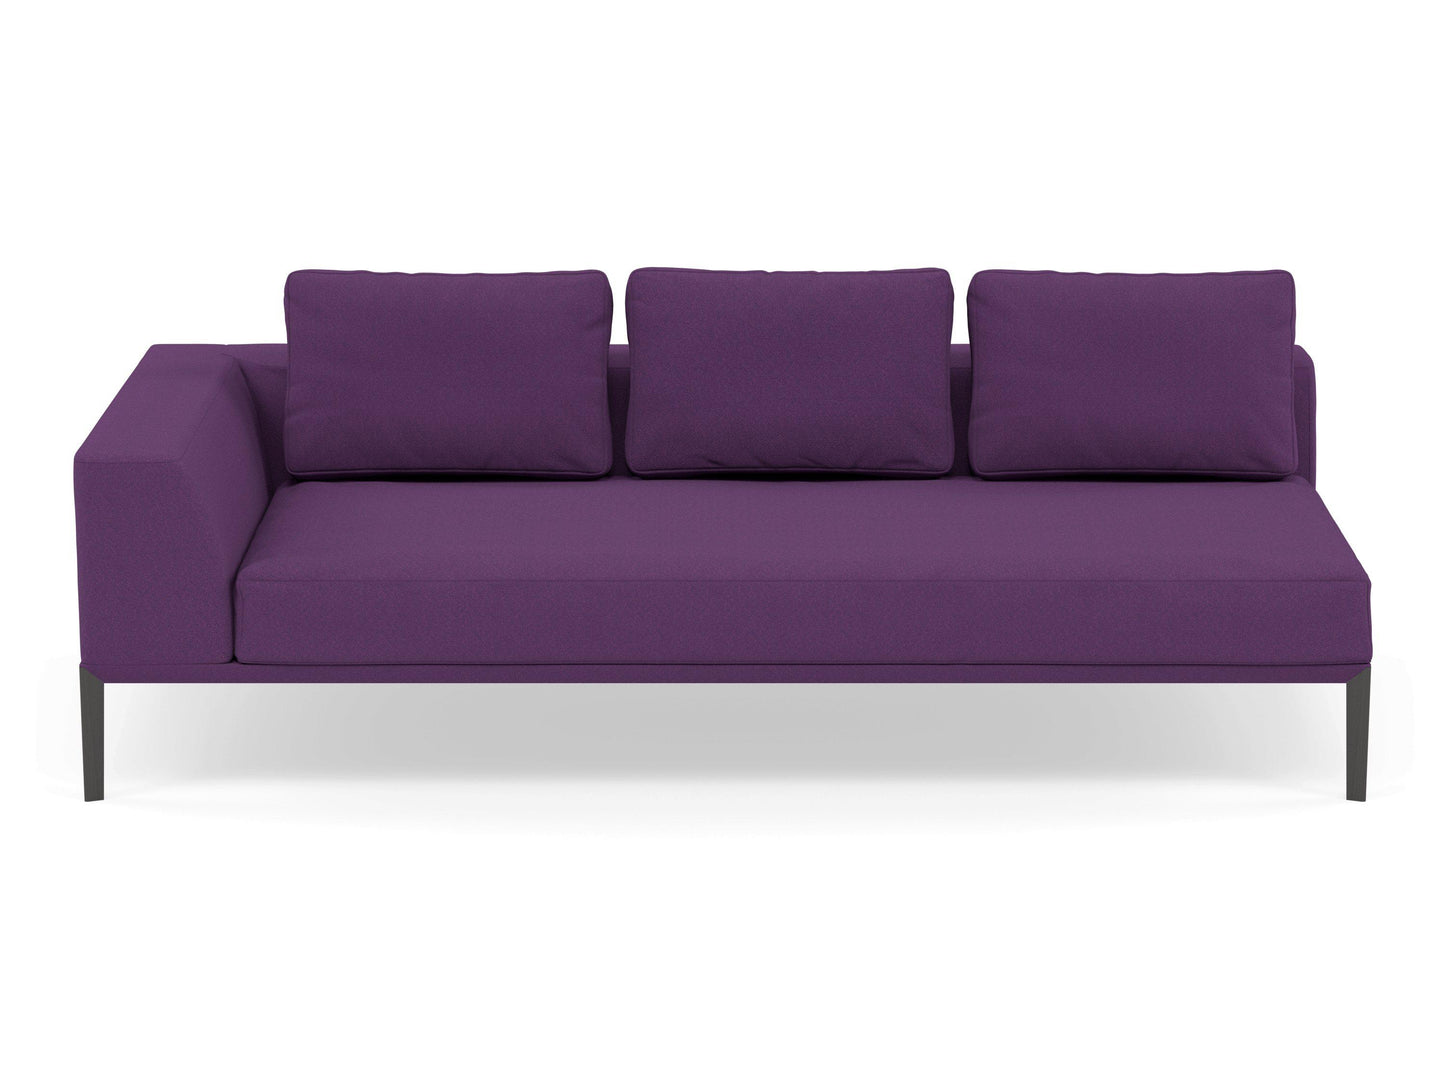 Modern 3 Seater Chaise Lounge Style Sofa with Right Armrest in Deep Purple Fabric-Wenge Oak-Distinct Designs (London) Ltd